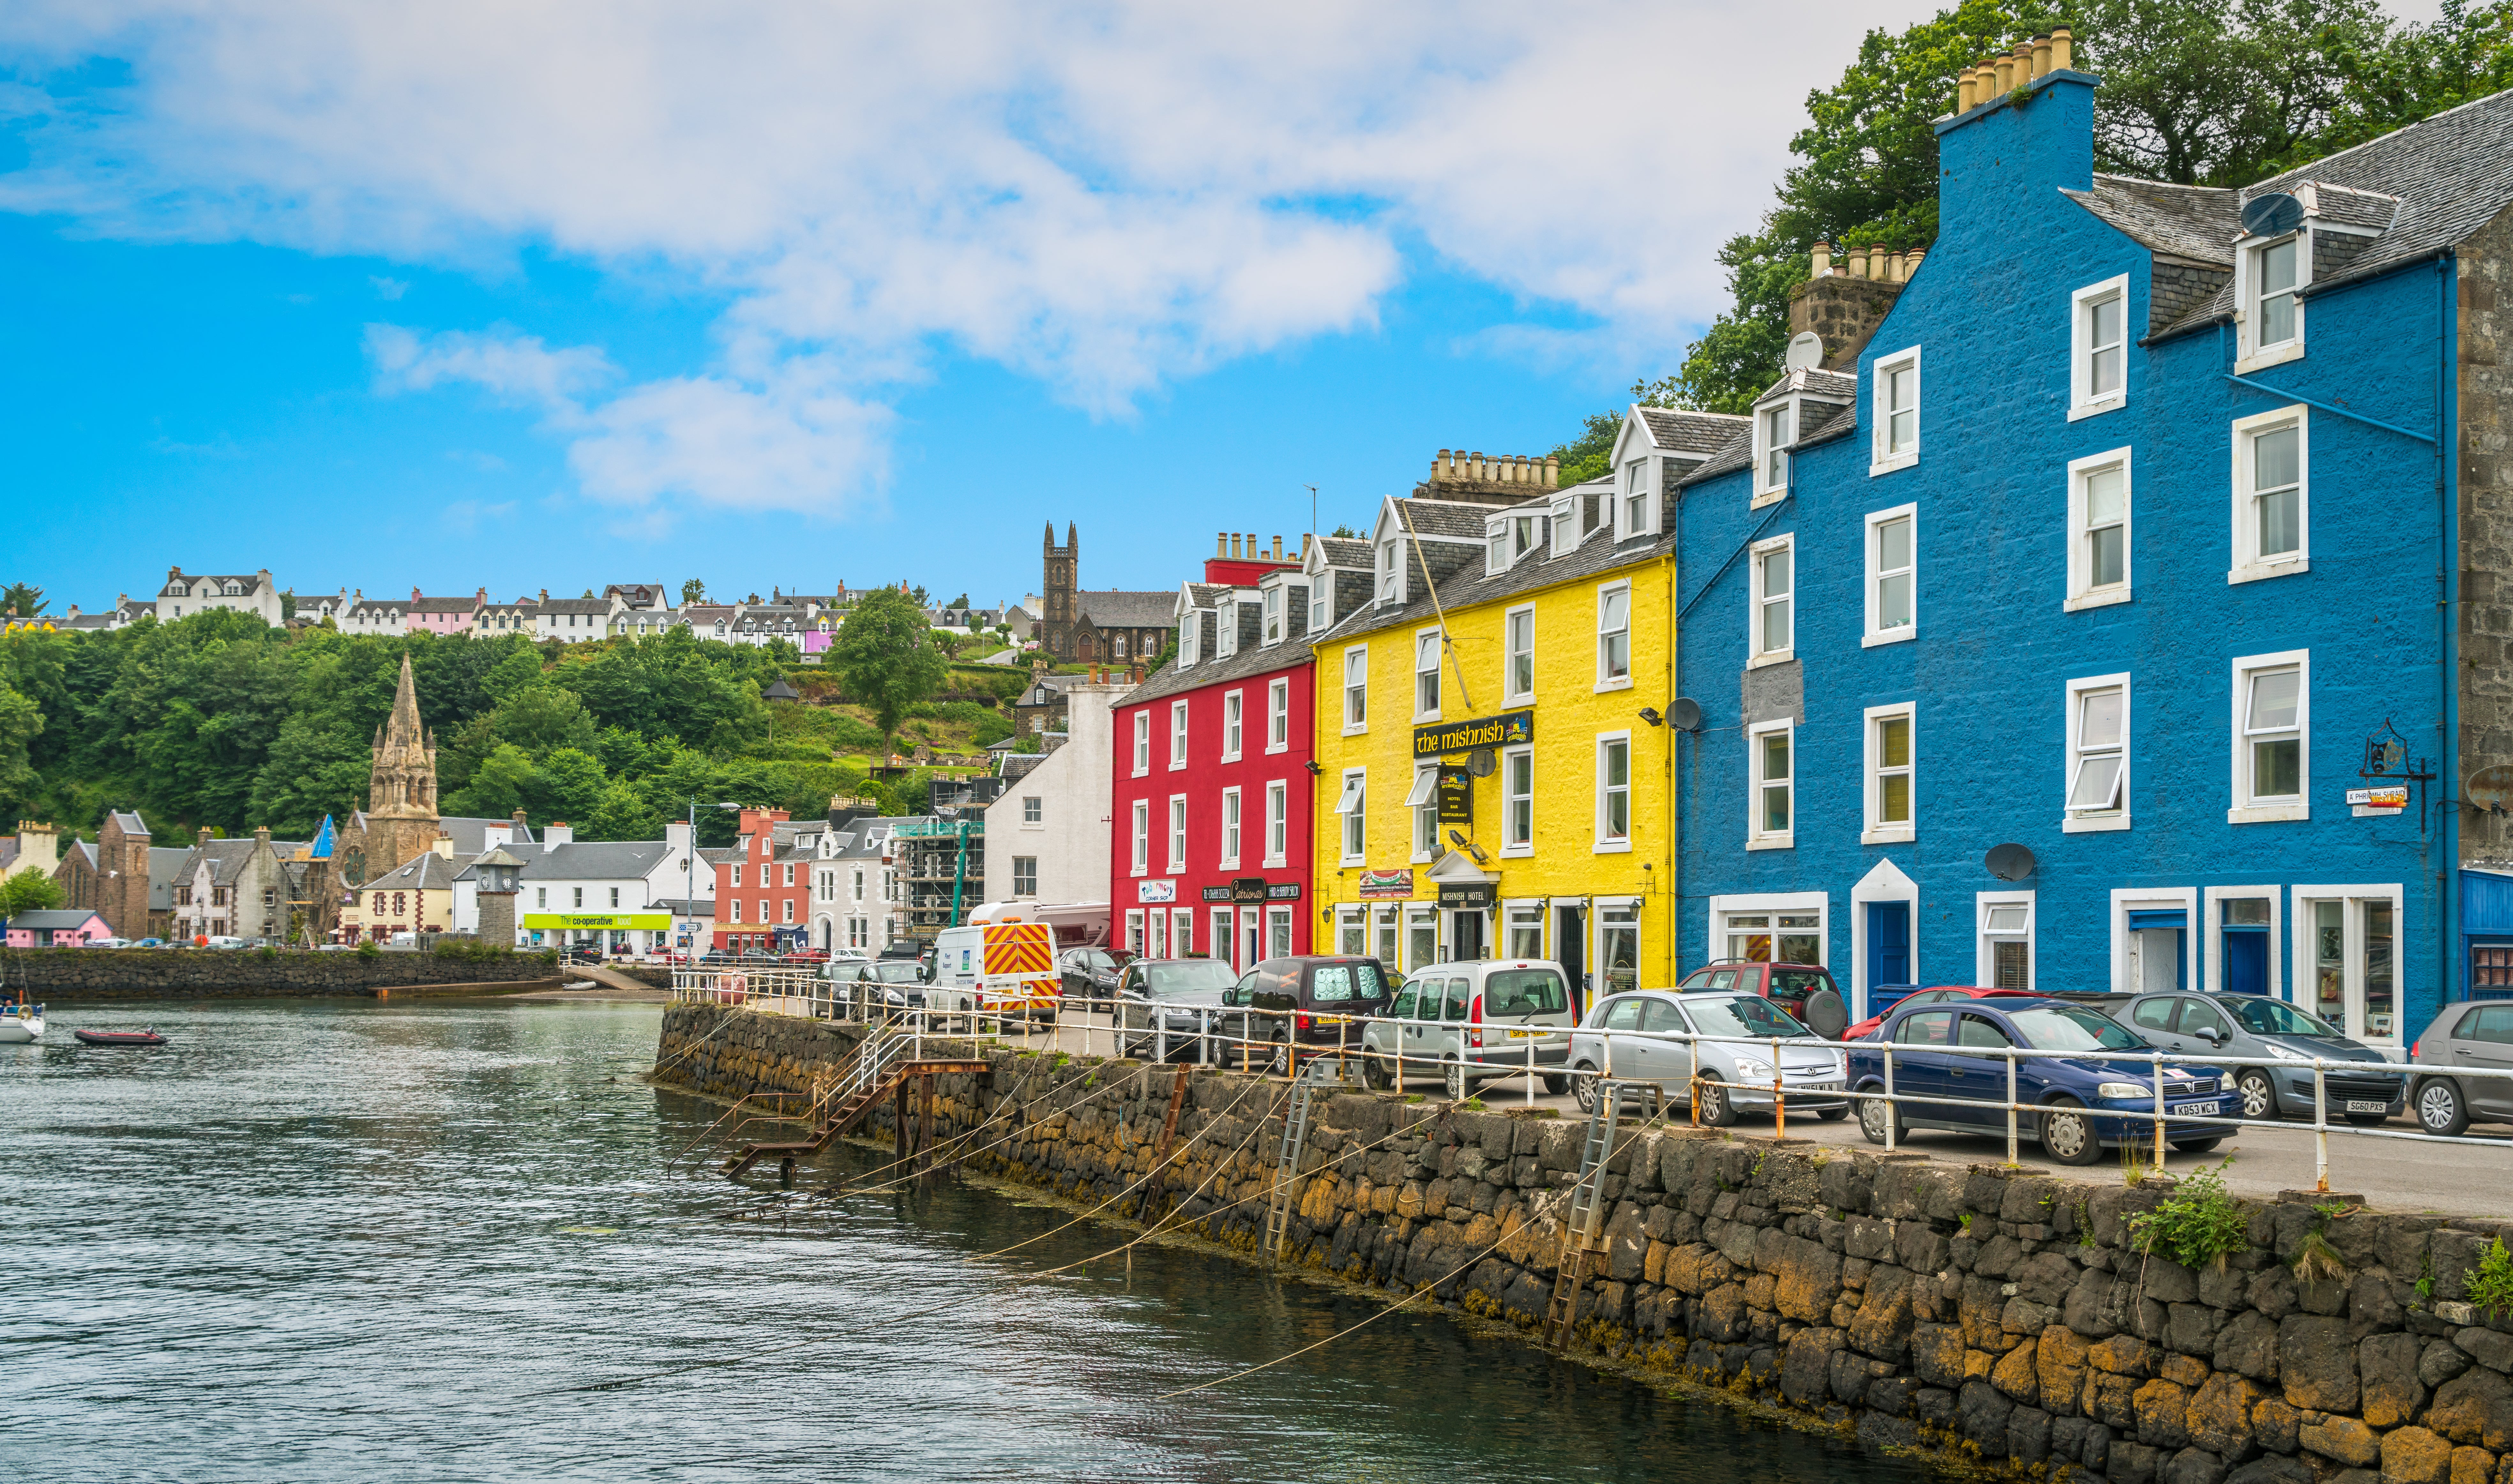 Tobermory, capital of the Isle of Mull, makes for a scenic summer day out